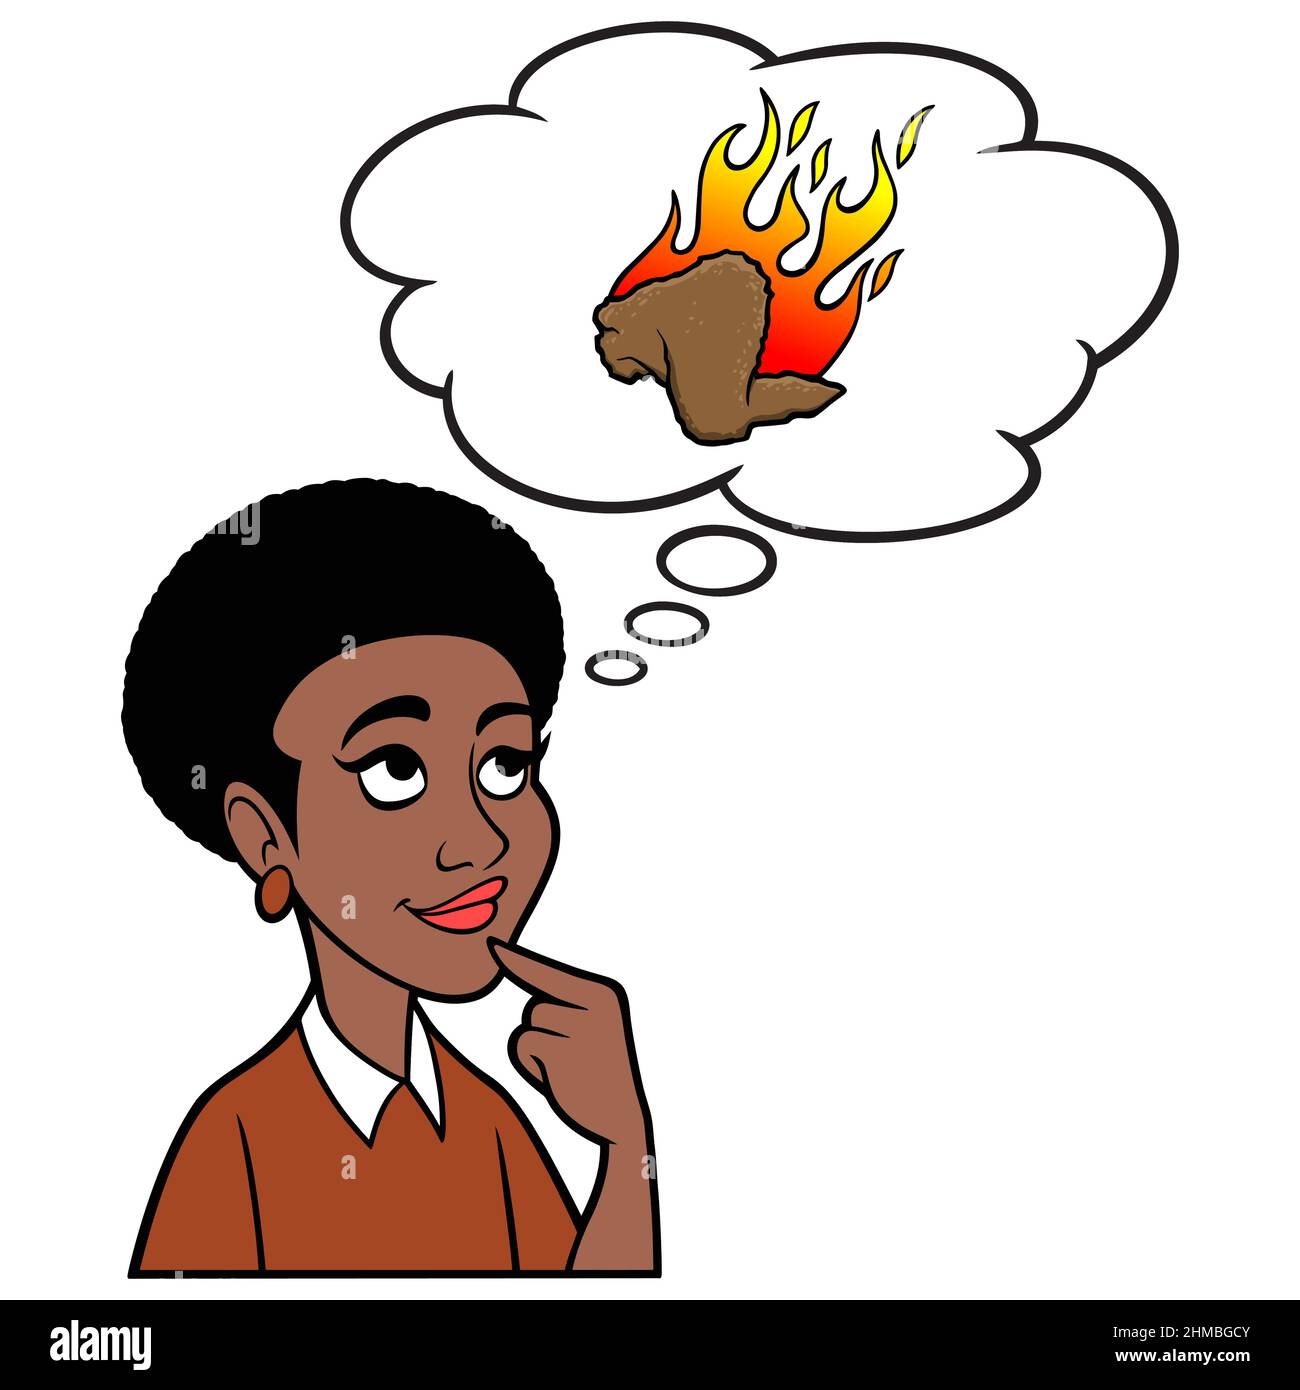 Black Woman Thing about Hot Wings - Une illustration de dessin animé d'une Black Woman Thing about Hot Wings for Dinner. Illustration de Vecteur